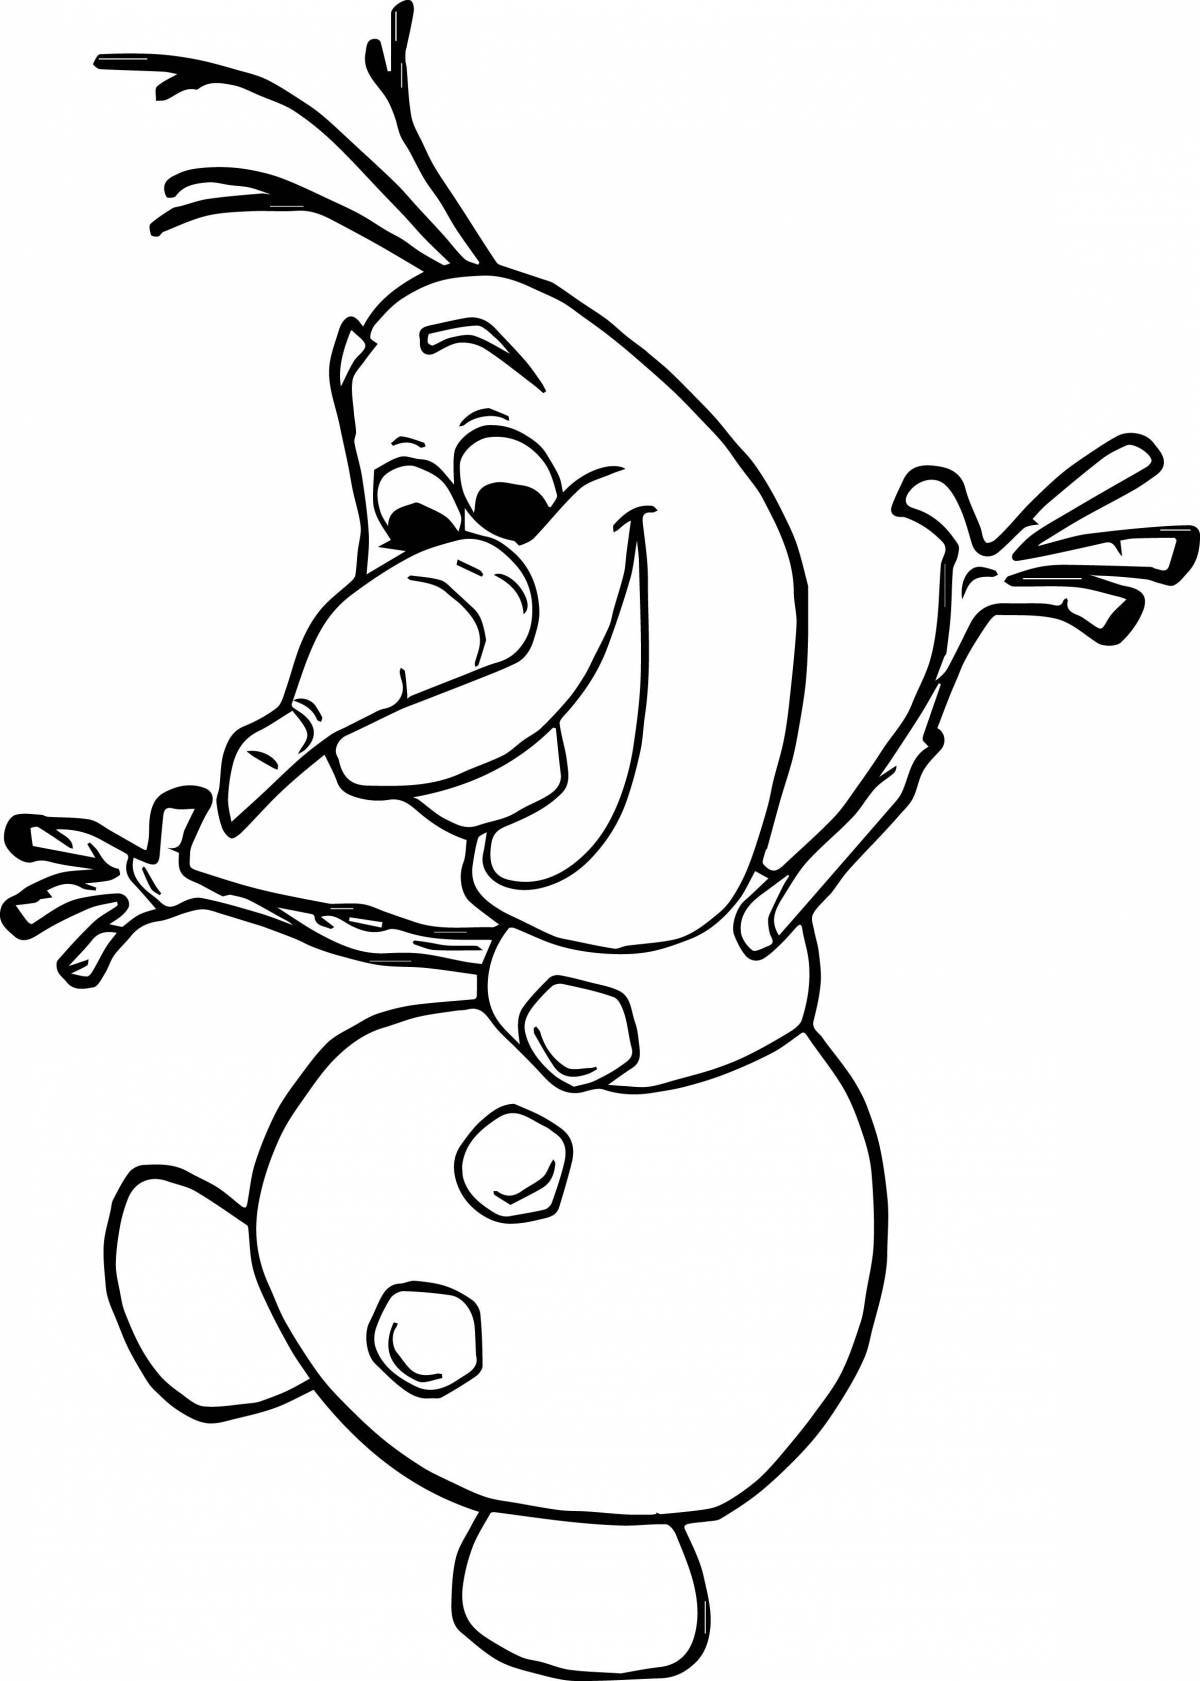 Olaf live coloring